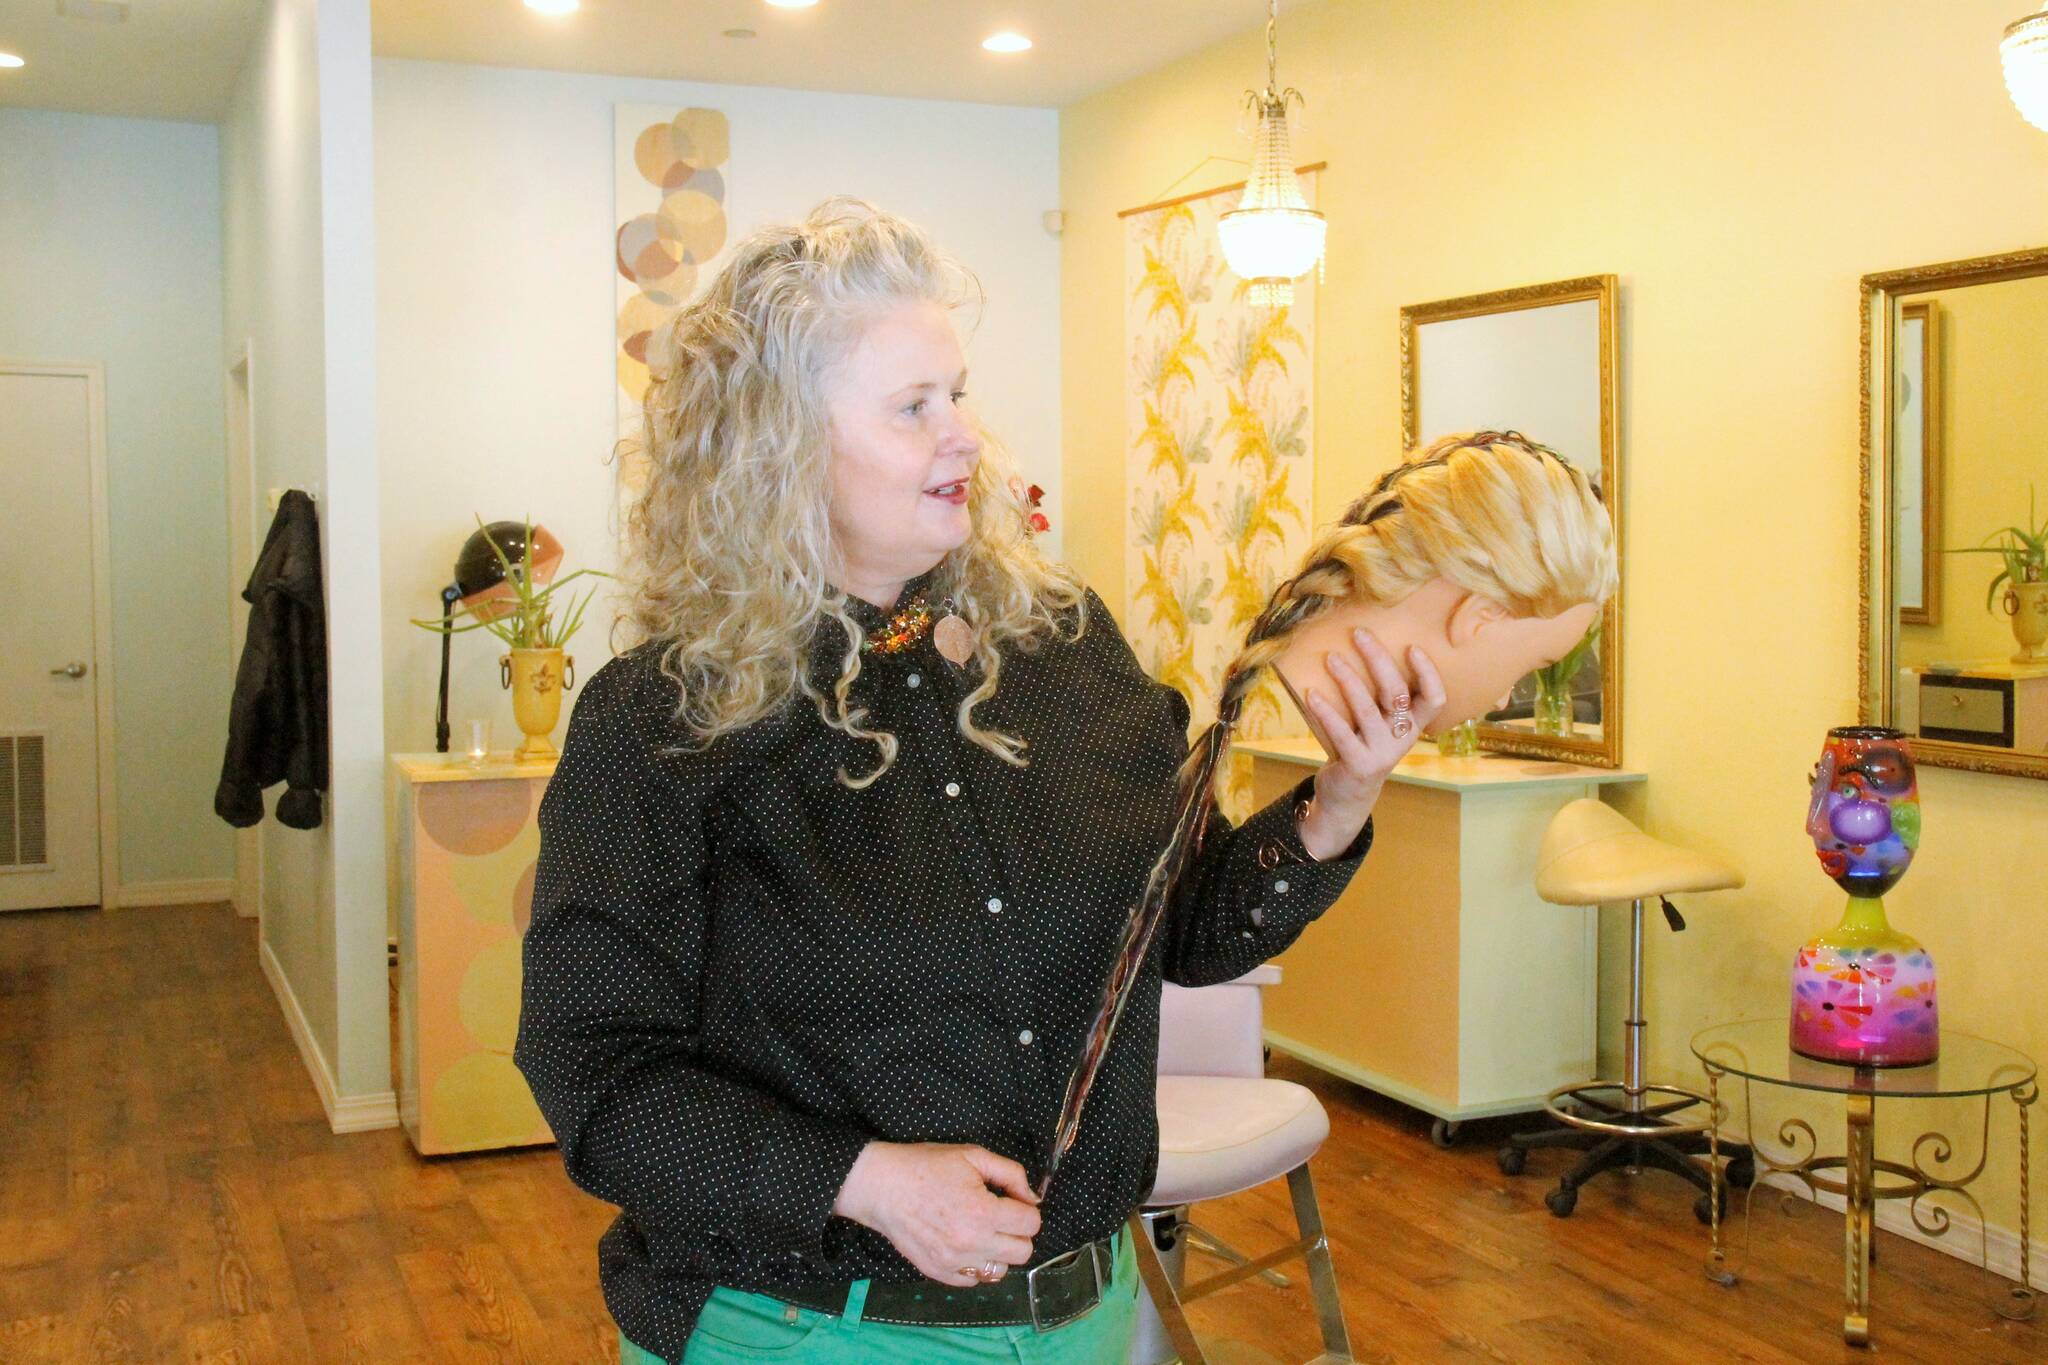 Alison Donham demonstrates what she calls “fantasy hair,” a blend of yarns that can be braided into someone’s hair as an accessory. (Photo by Kira Erickson/South Whidbey Record)